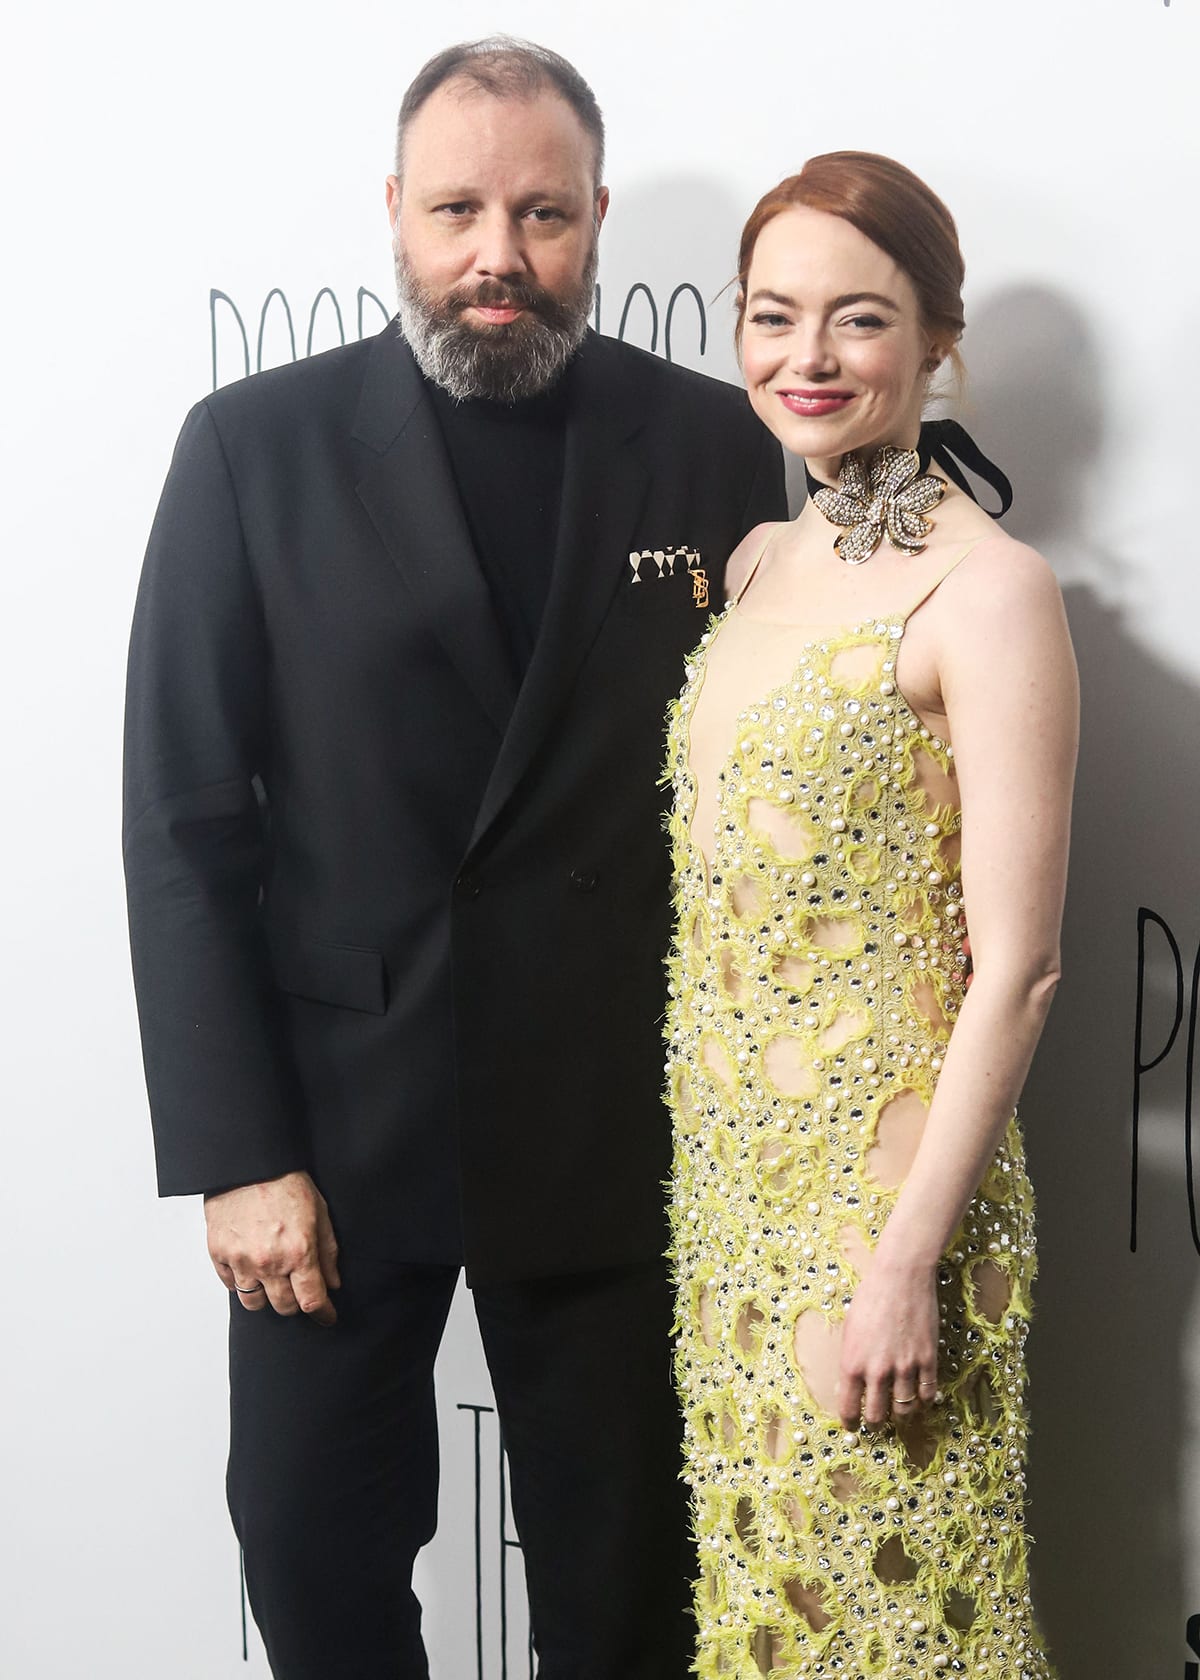 Poor Things director Yorgos Lanthimos says Emma Stone's sex scenes are important in telling Bella Baxter's story